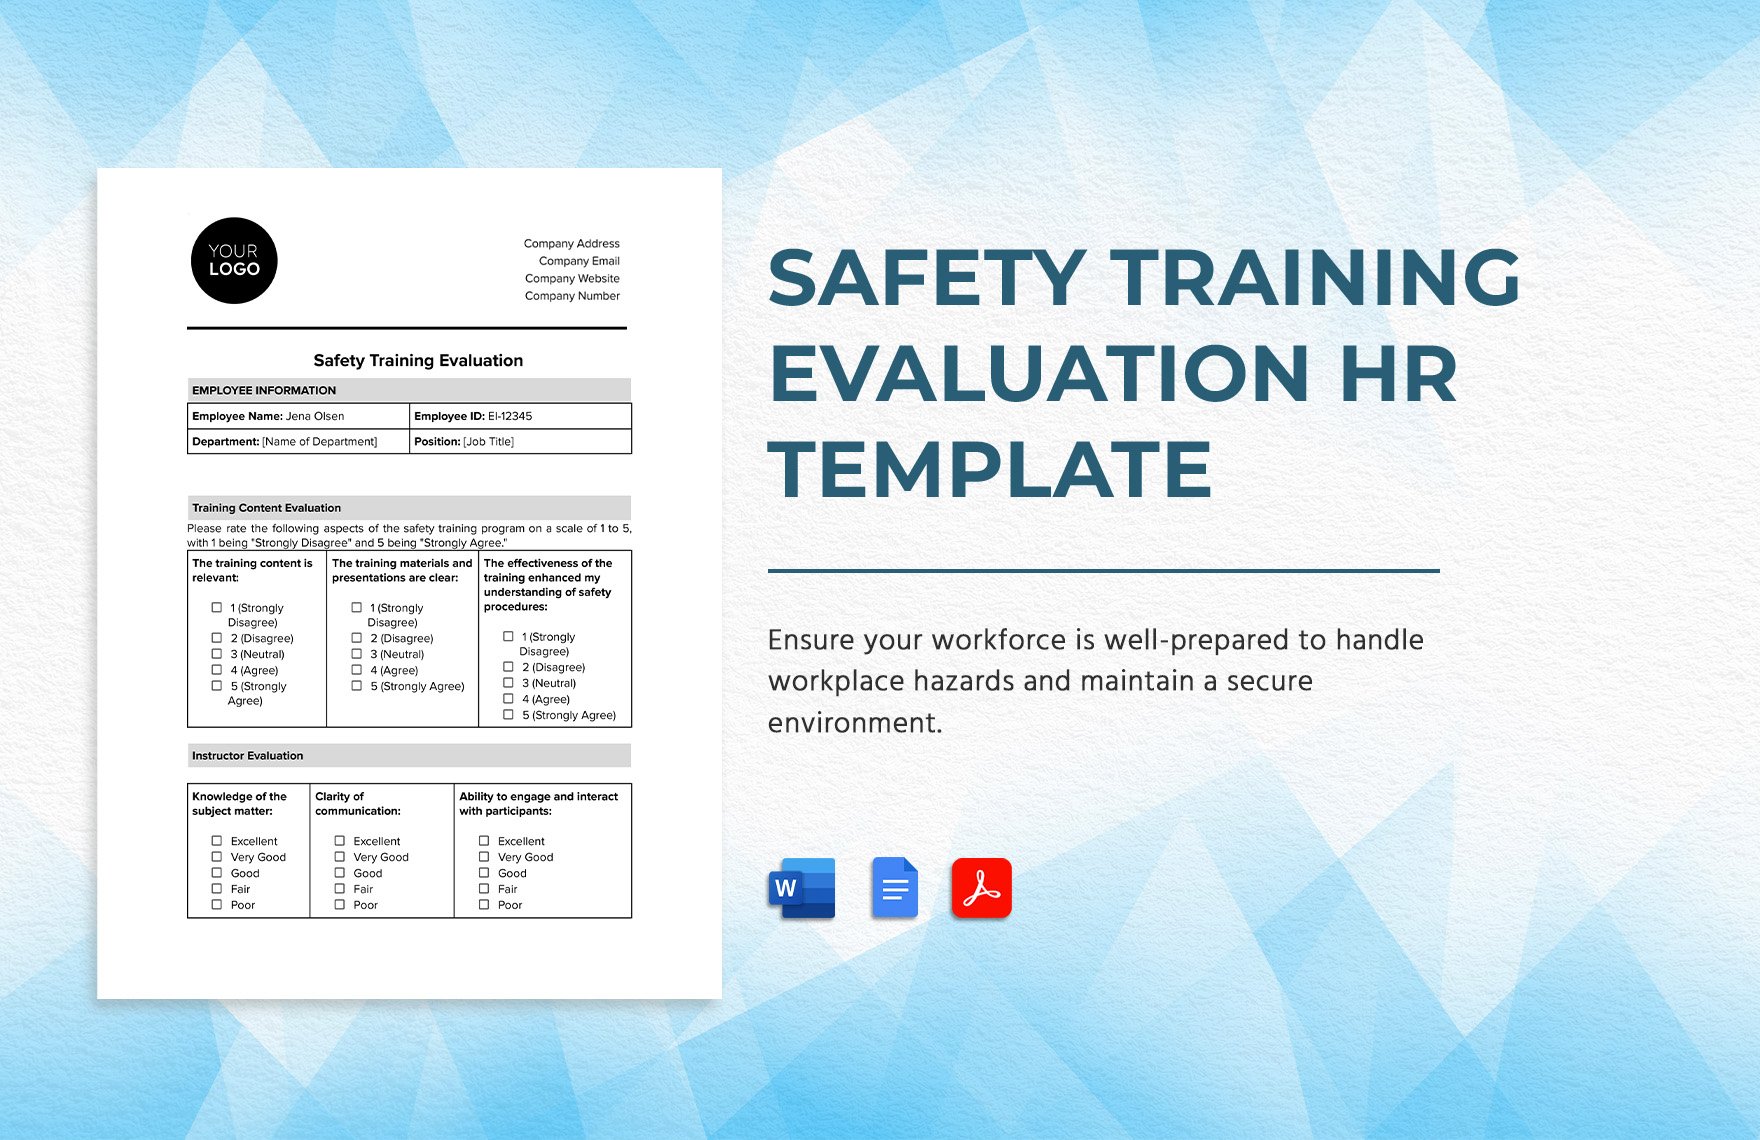 Safety Training Evaluation HR Template in Word, Google Docs, PDF